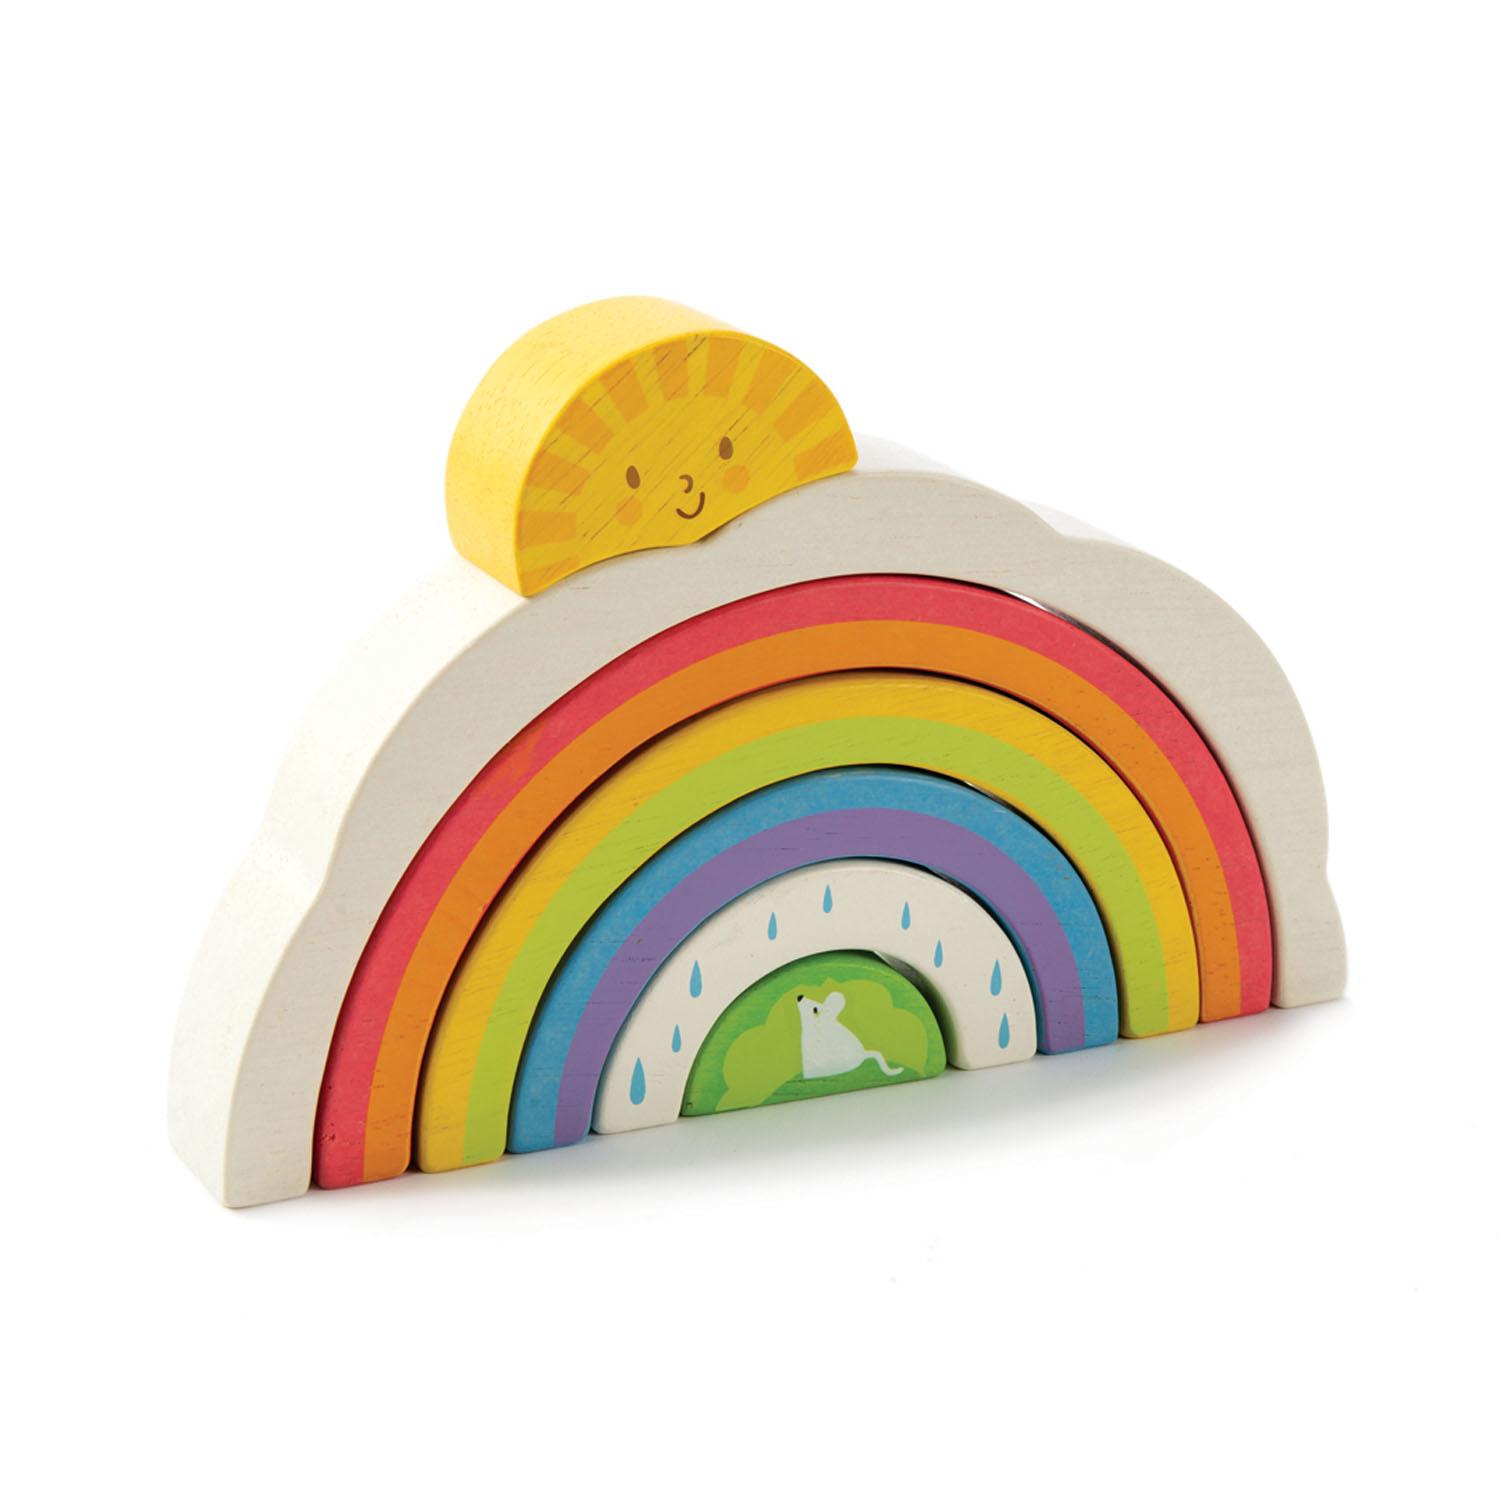 New Wooden 7 Piece Toy Rainbow with Stackable Pieces #2